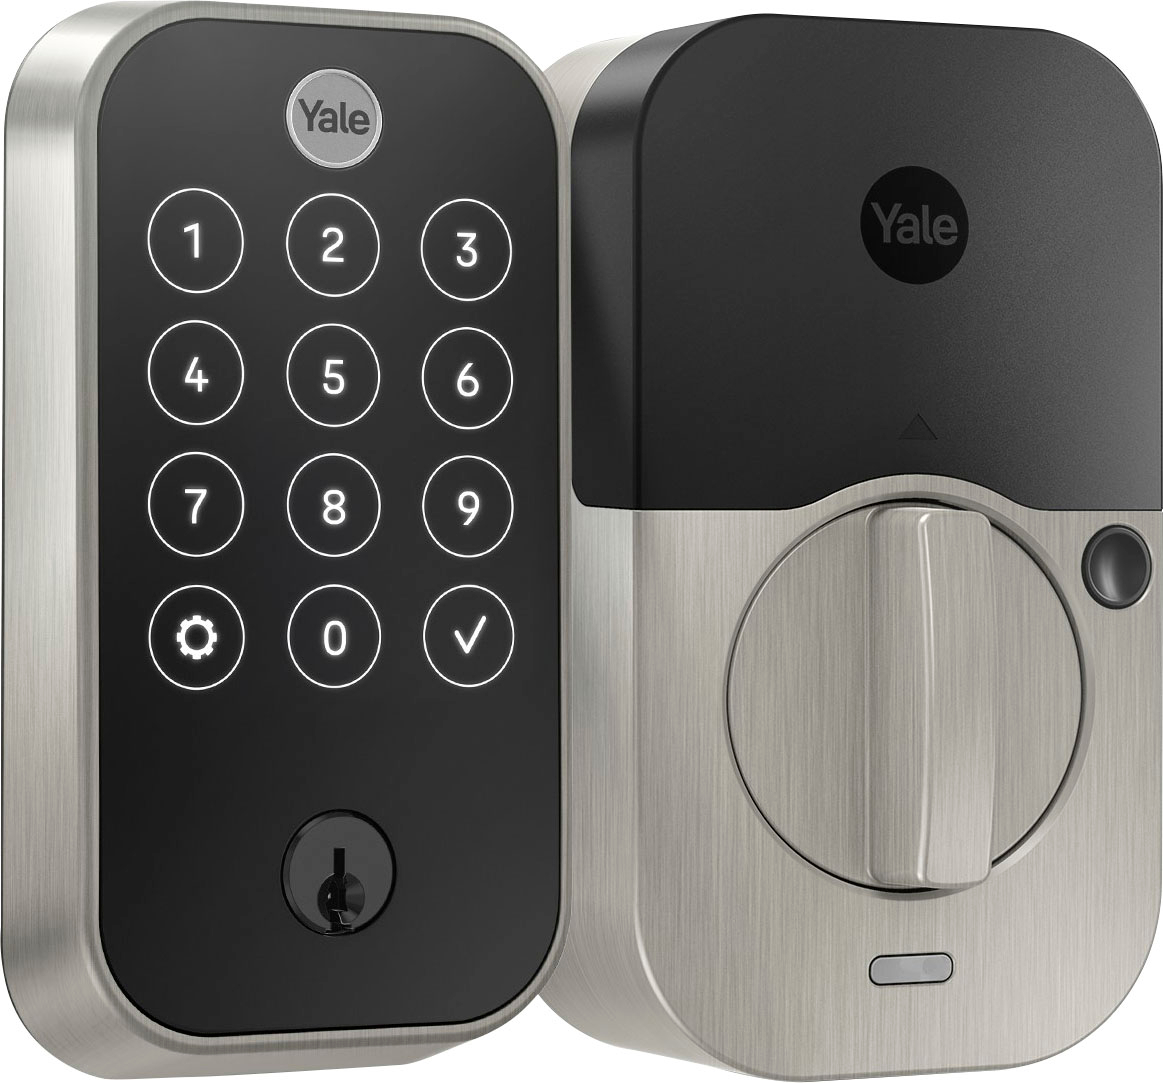 Yale Assure Lock 2 Touchscreen with Wi-Fi